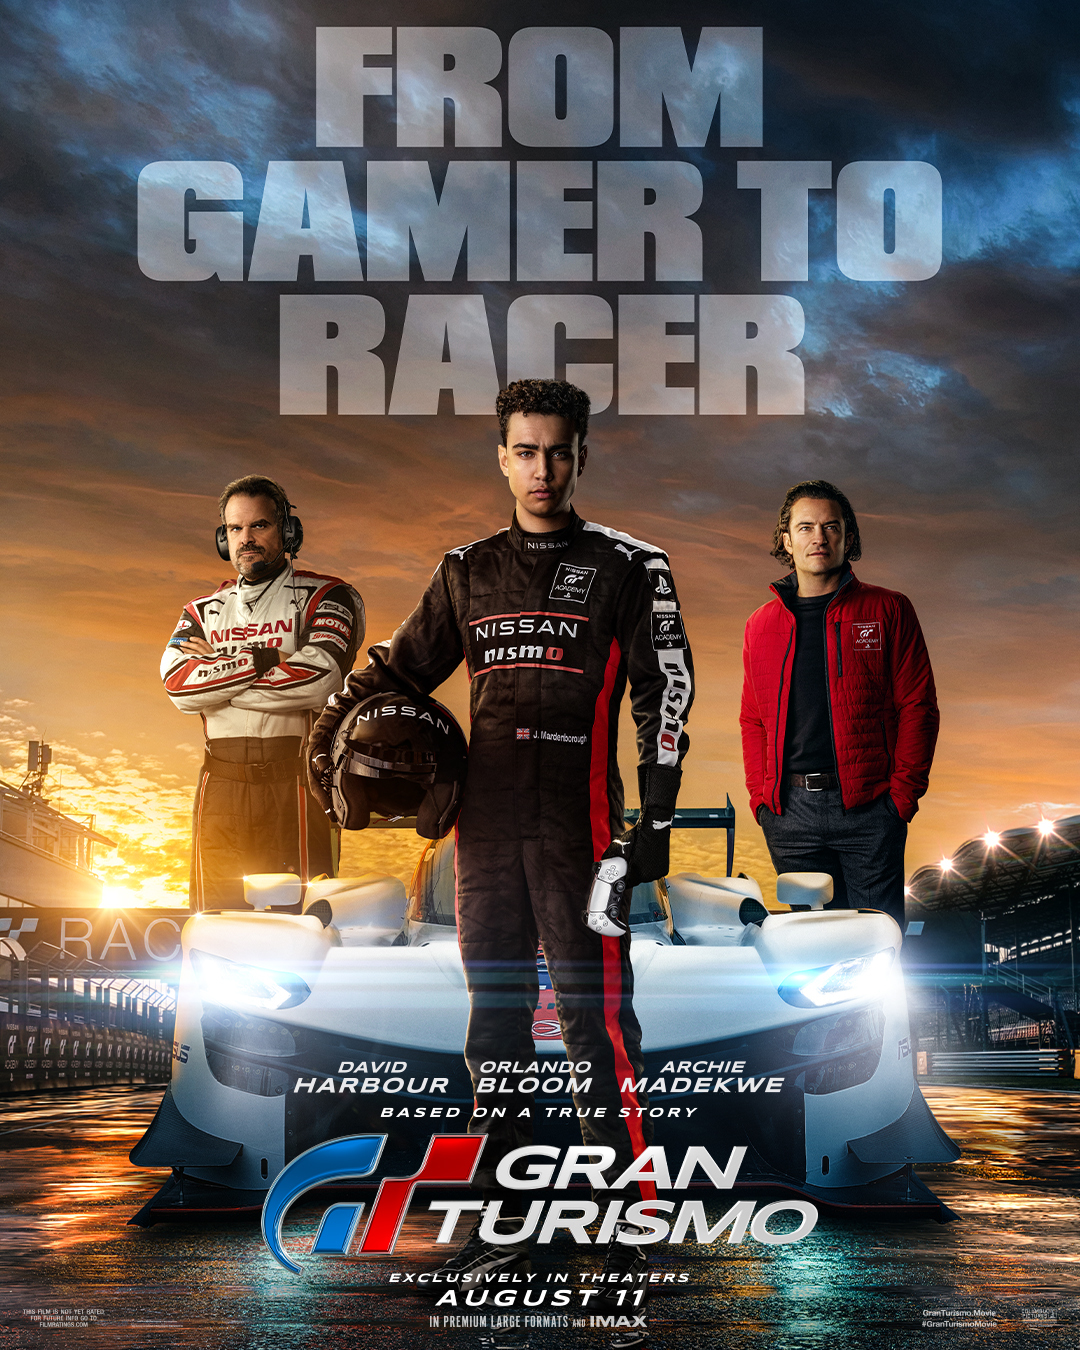 The Gran Turismo film takes us from player to pilot in the trailer